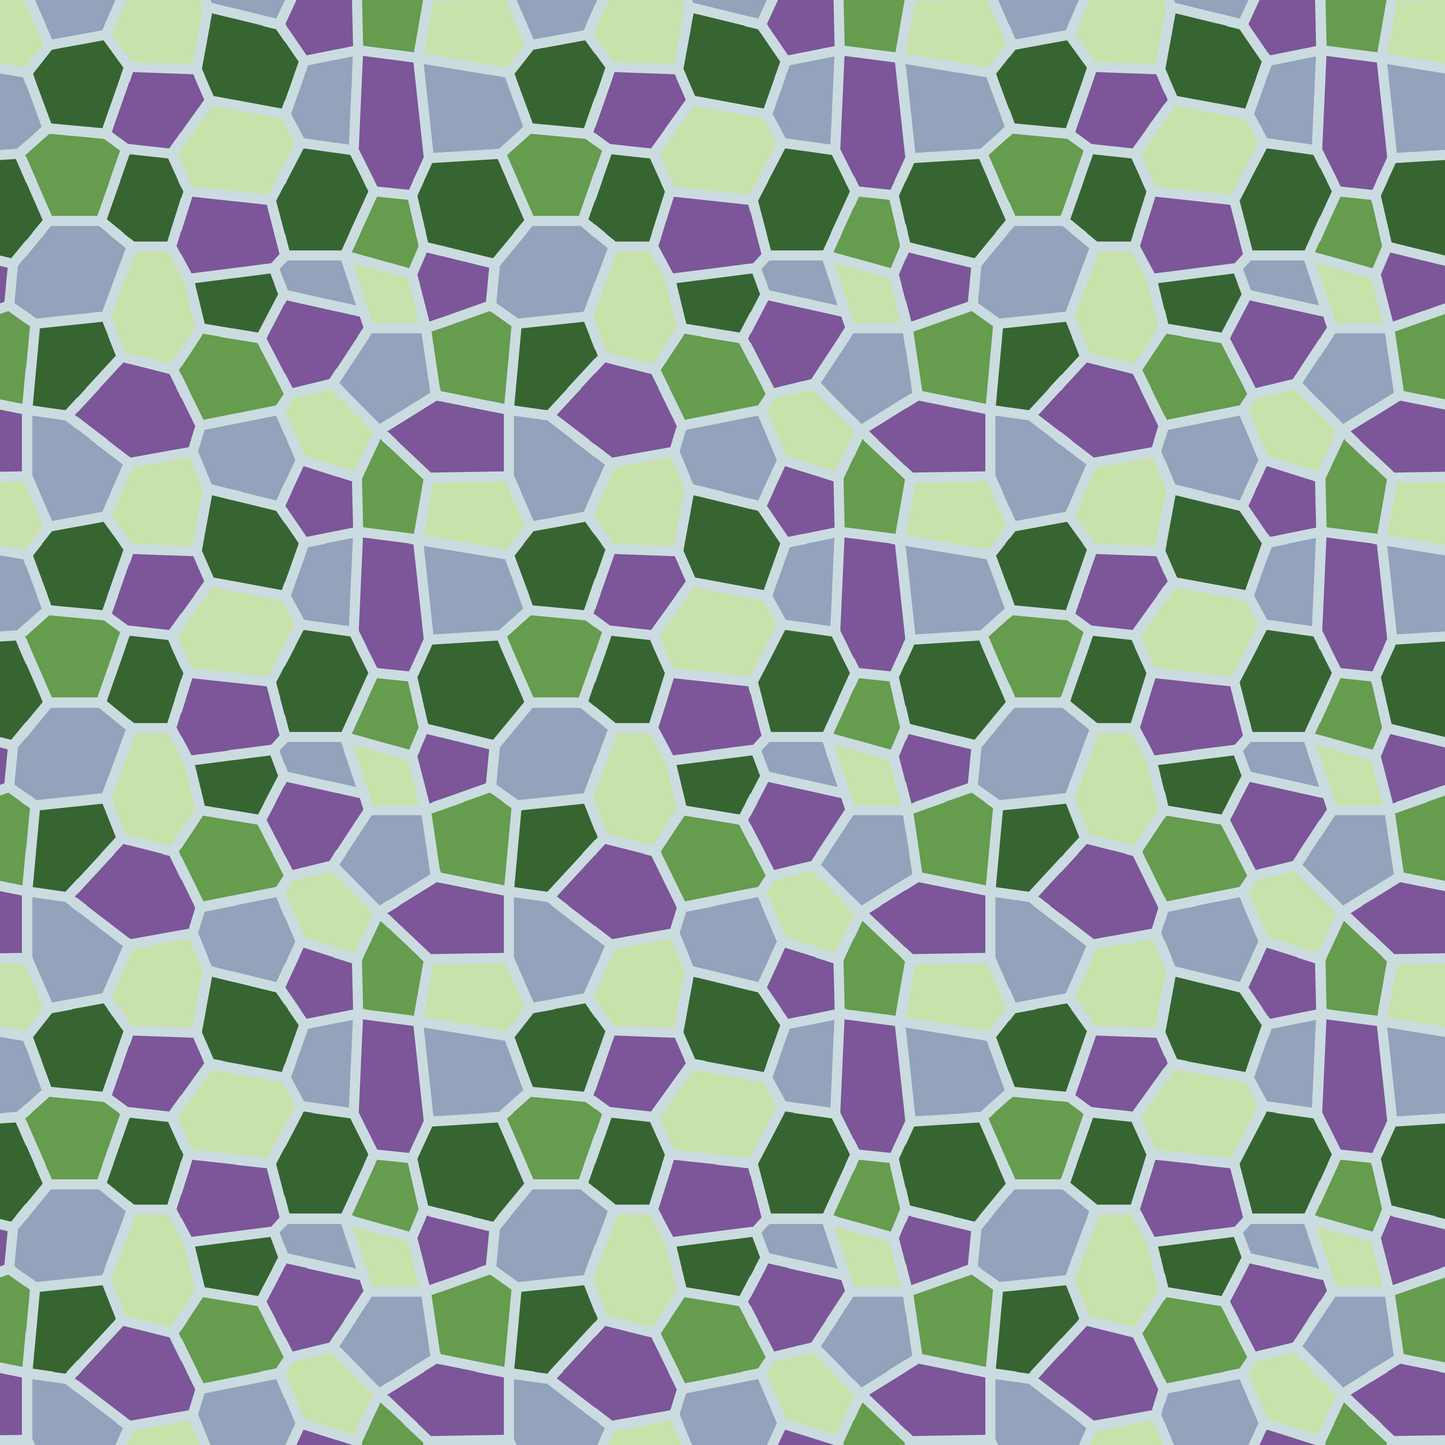 Stained Glass Mosaic - Shades of Green and Purple 023